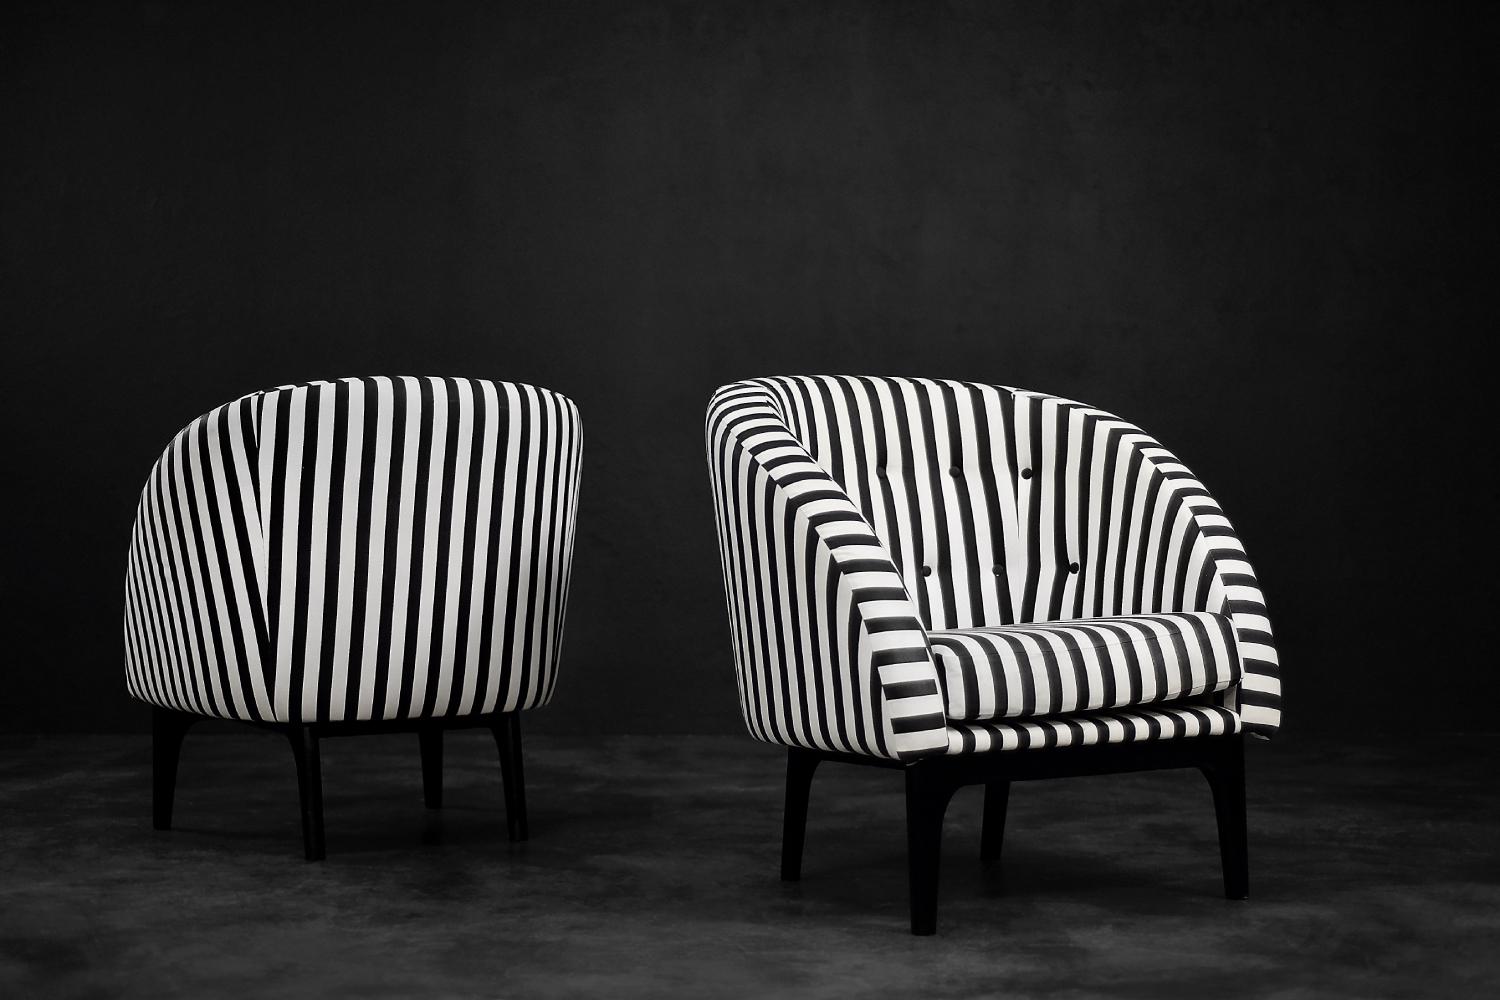 Pair of Mid-Century Scandinavian Modern Armchairs with Black&White Stripes, 1960 For Sale 5